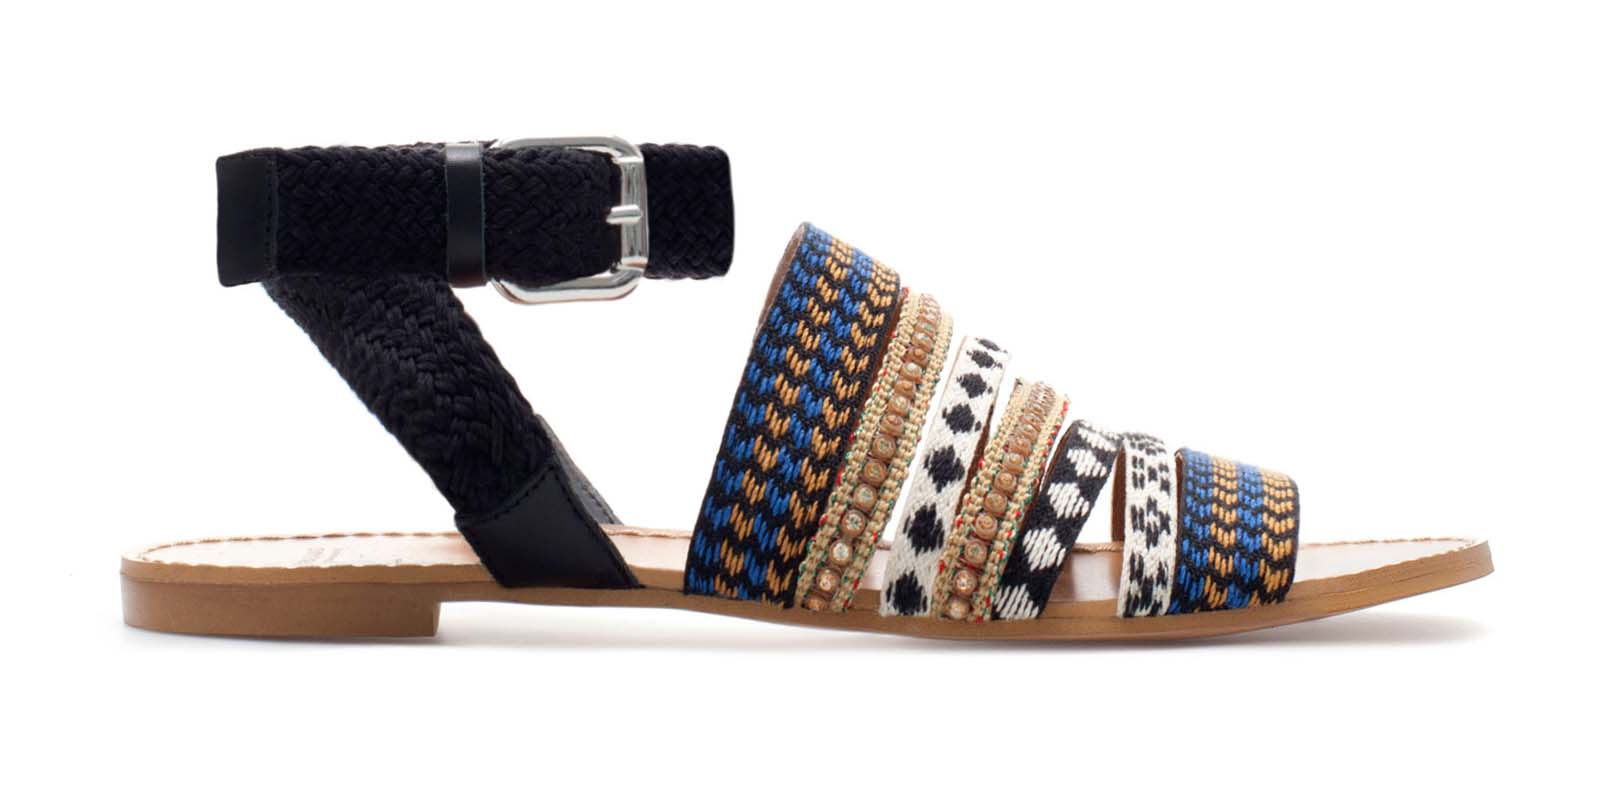  ZARA  NEW COLLECTION 2013 COW LEATHER AND COTTON ETHNIC 